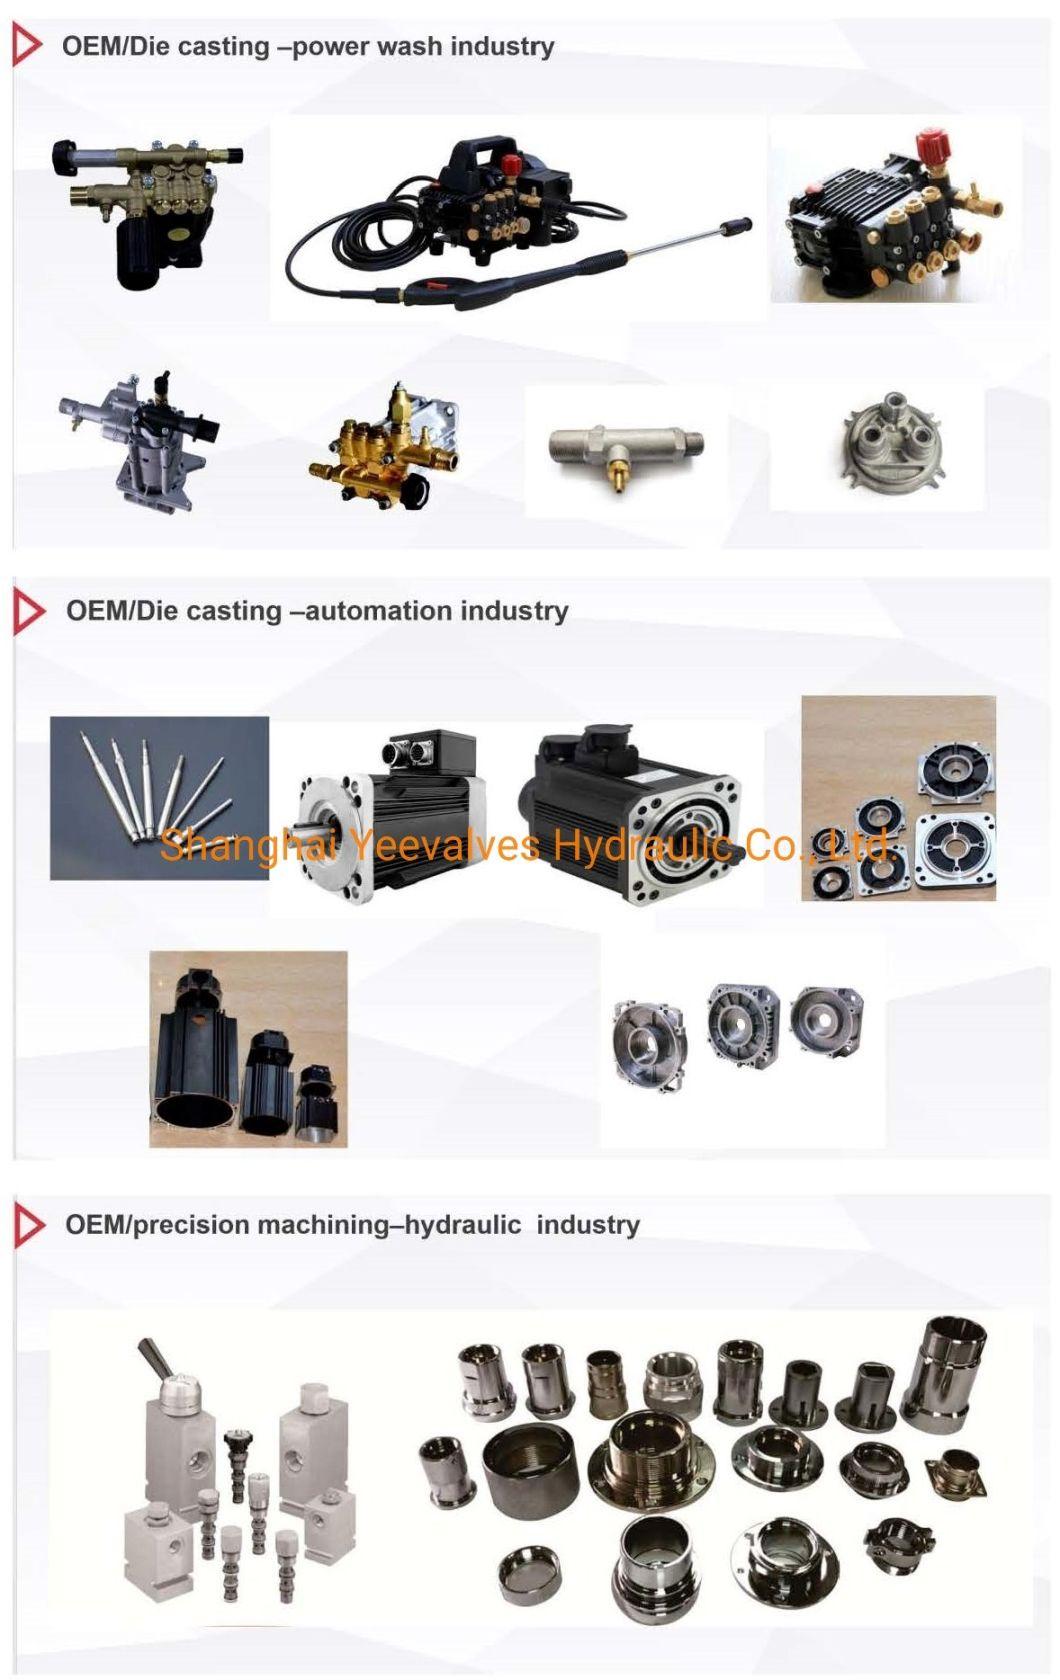 Sun Rexroth Hawe Cartridge Valve Hydraulic Flow Control Valves Relief Control Valves with CNC Machining Drilling